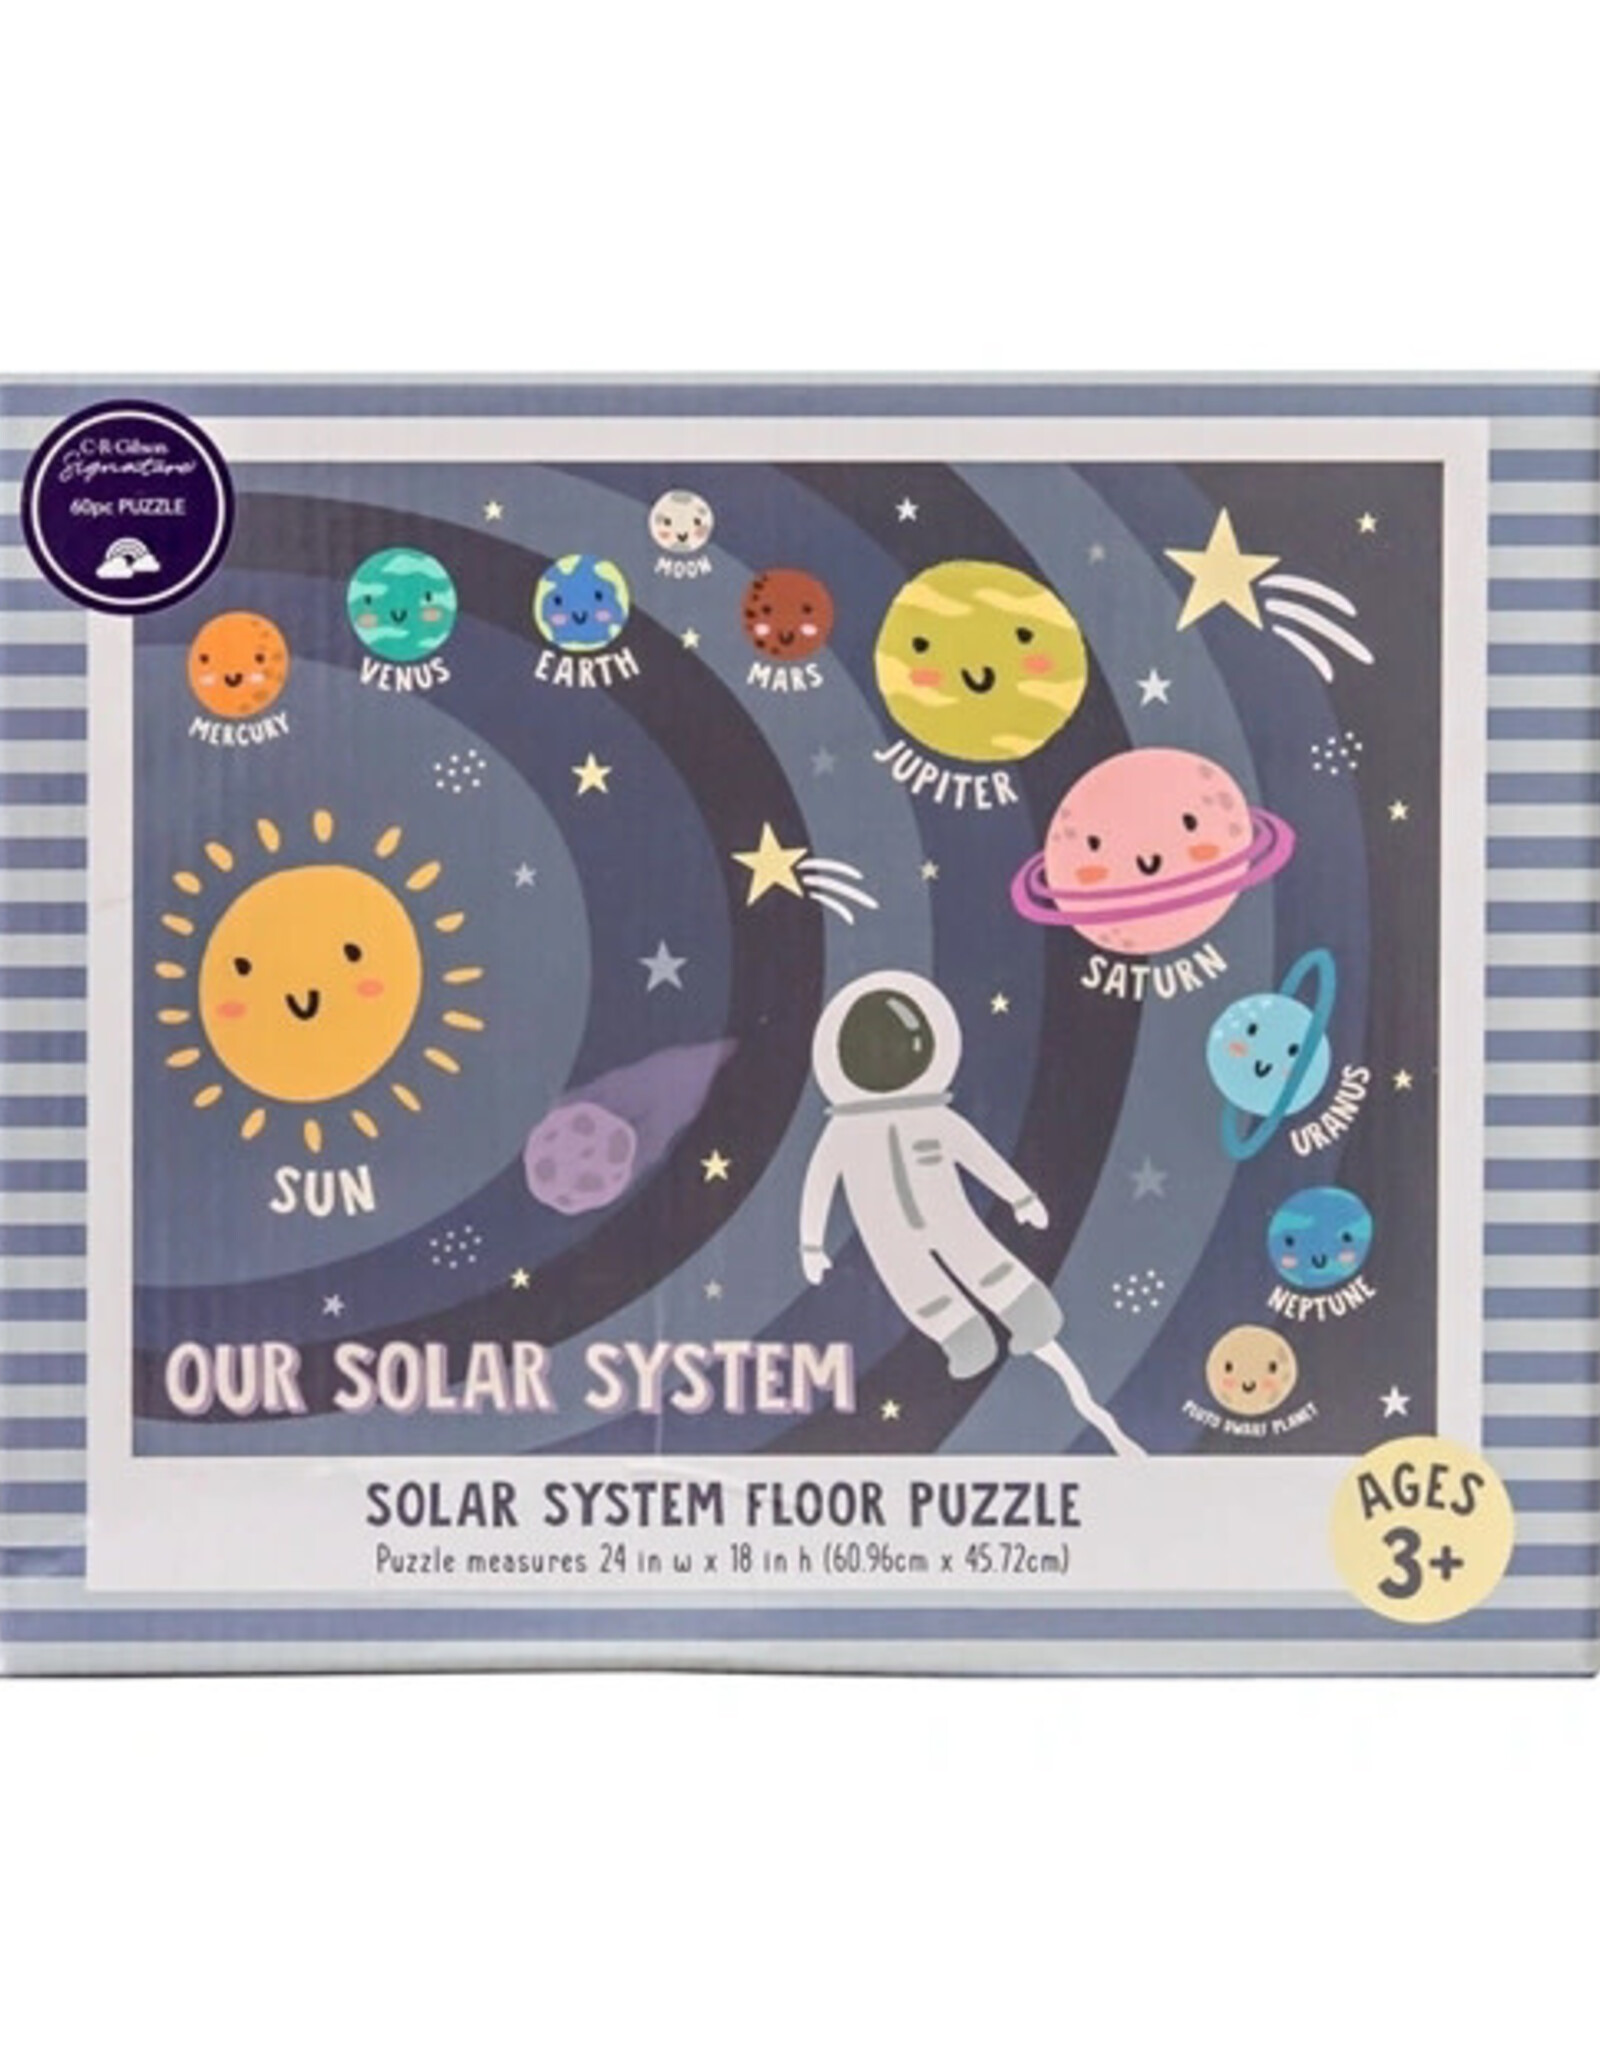 Our Solar System Floor Puzzle